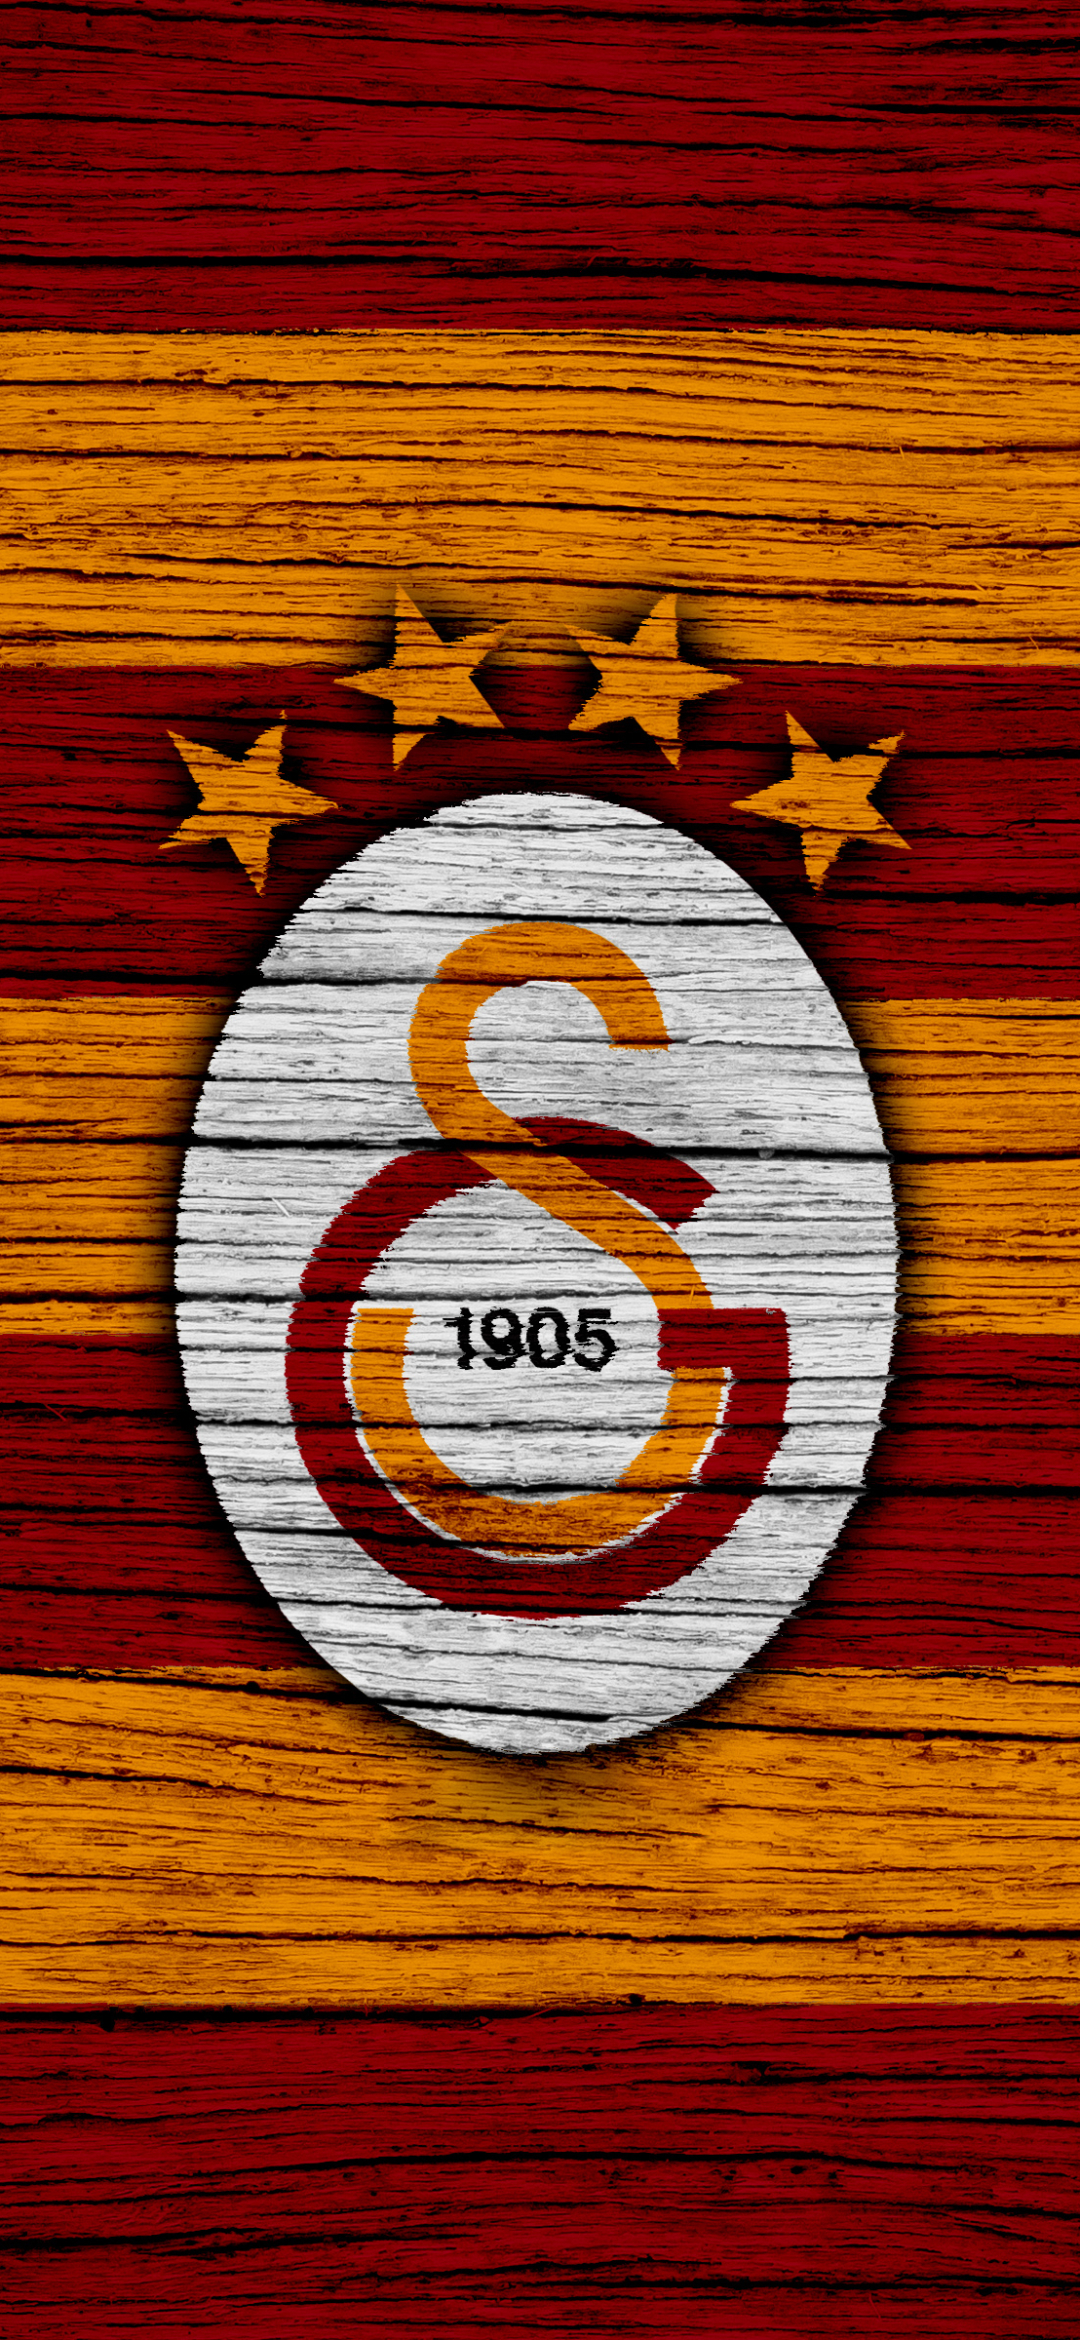  Galatasaray S K Cellphone FHD pic